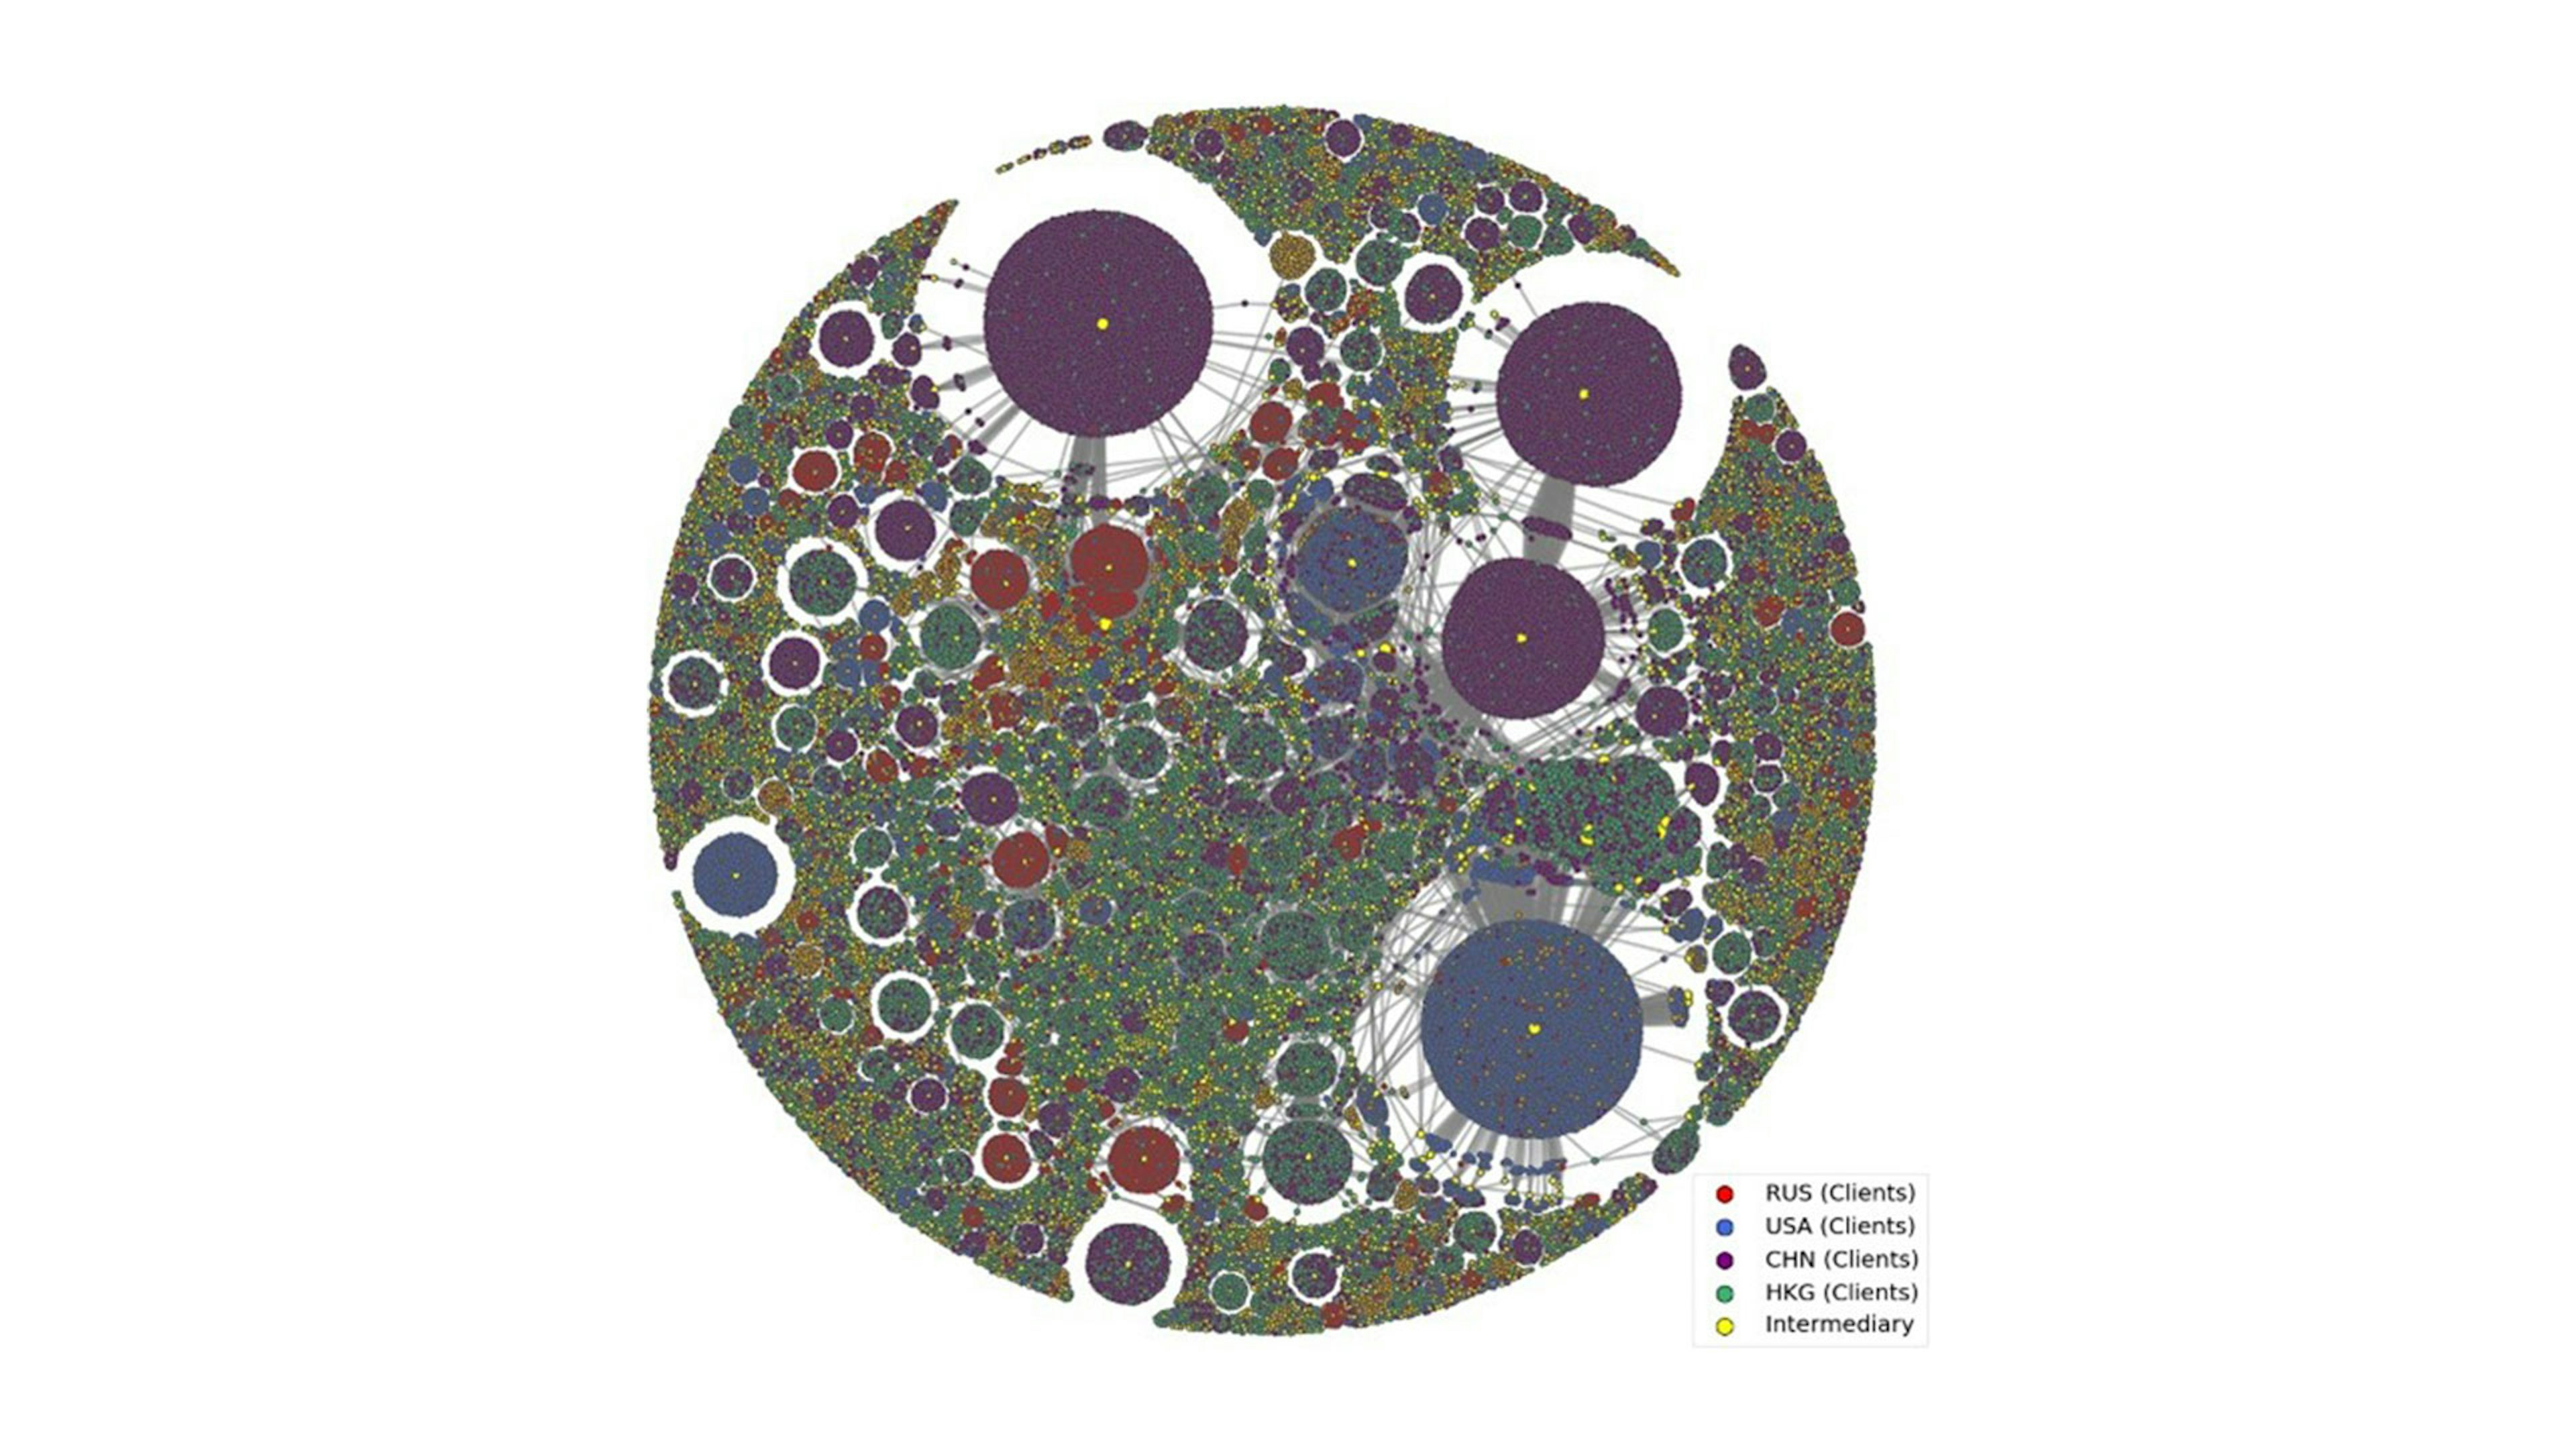 Fig 1: Offshore bipartite financial networks constructed using the ICIJ offshore leaks database. For clarity, shown here is the partial network of 79,458 intermediaries and their clients from Russia (RUS/red), China (CHN/purple), Hong Kong (HKG/green), and the USA (USA/blue). Nodes are either beneficiaries or intermediaries, visualized through physics-based verlet integration. This is a subset of a greater network of 1,970,448 nodes and 3,273,524 edges.